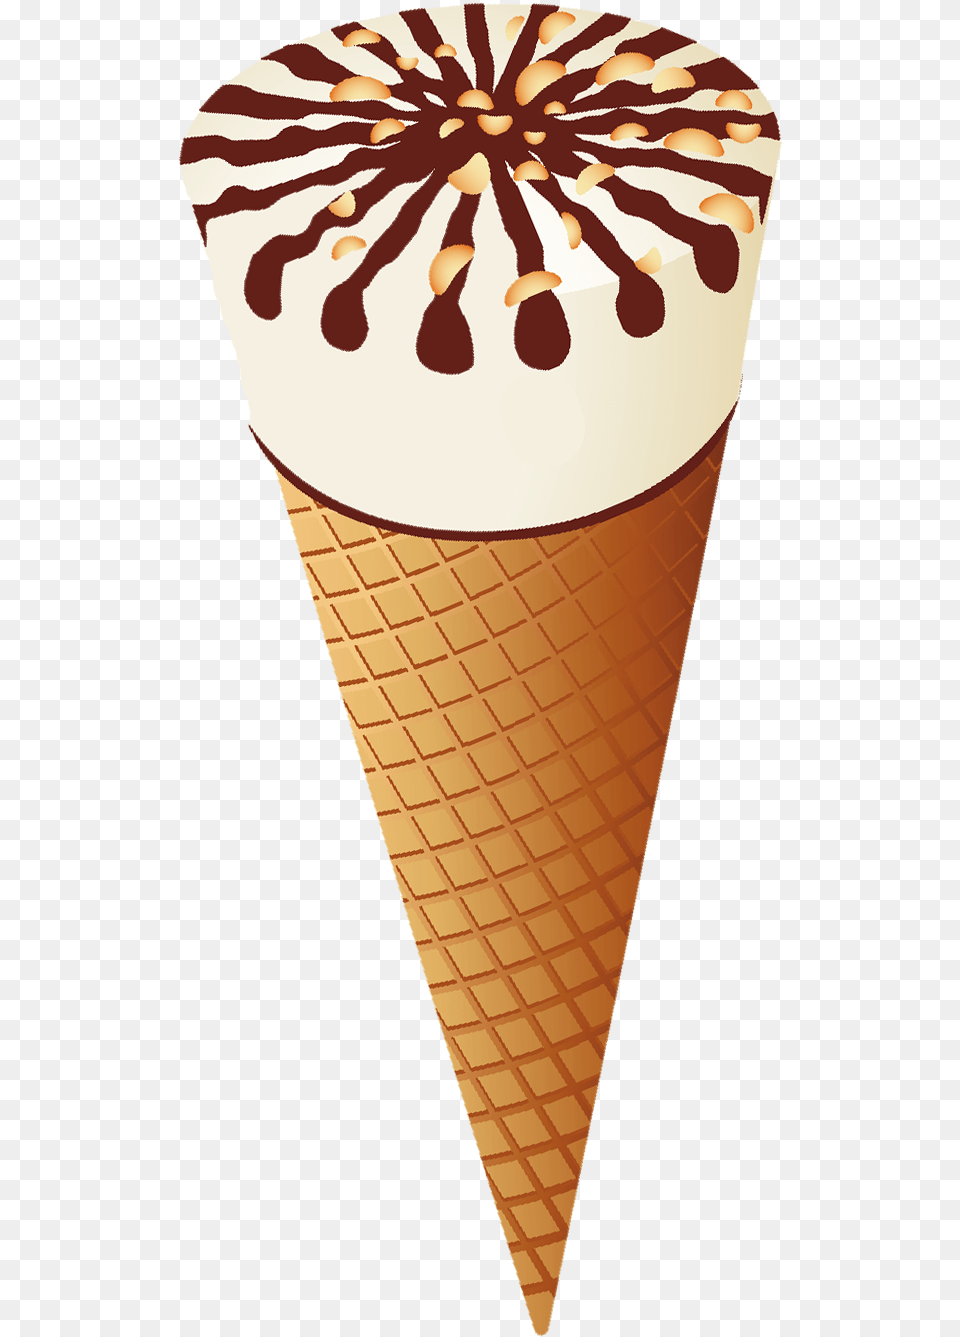 Clip Arts Related To Ice Cream Clip Art Transparent, Dessert, Food, Ice Cream, Person Png Image